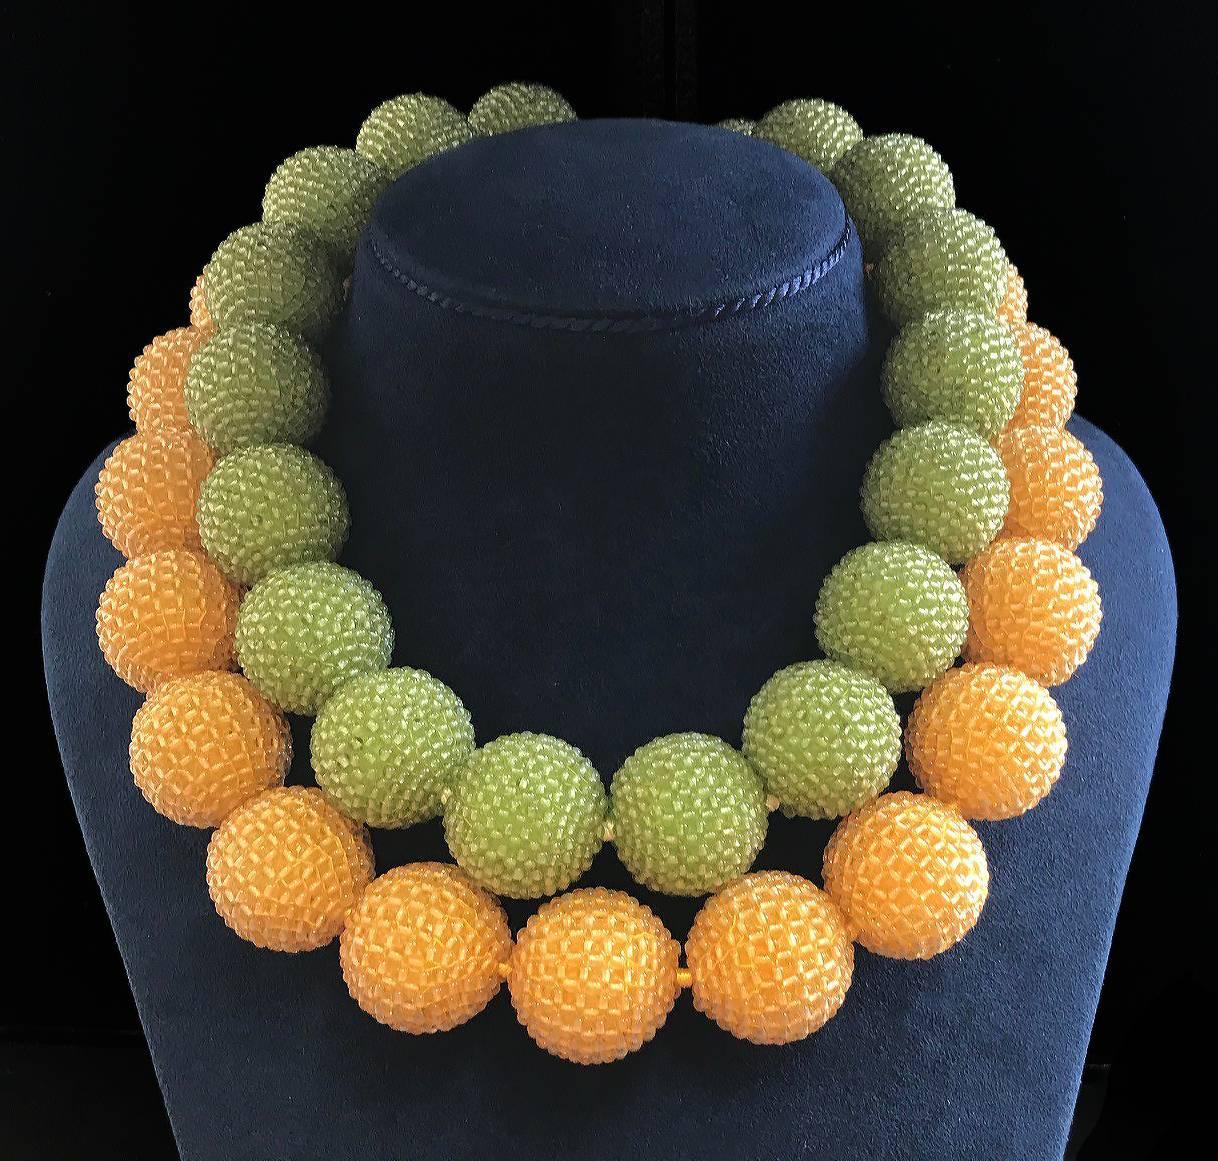 Valentin Magro Large Peridot Gold Woven Ball Necklace is filled with warm verdant hues. The jewel of choice, peridot, is famed for its yellow green shades. These peridots are carved into numerous little beads before they’re woven into 24-25mm balls